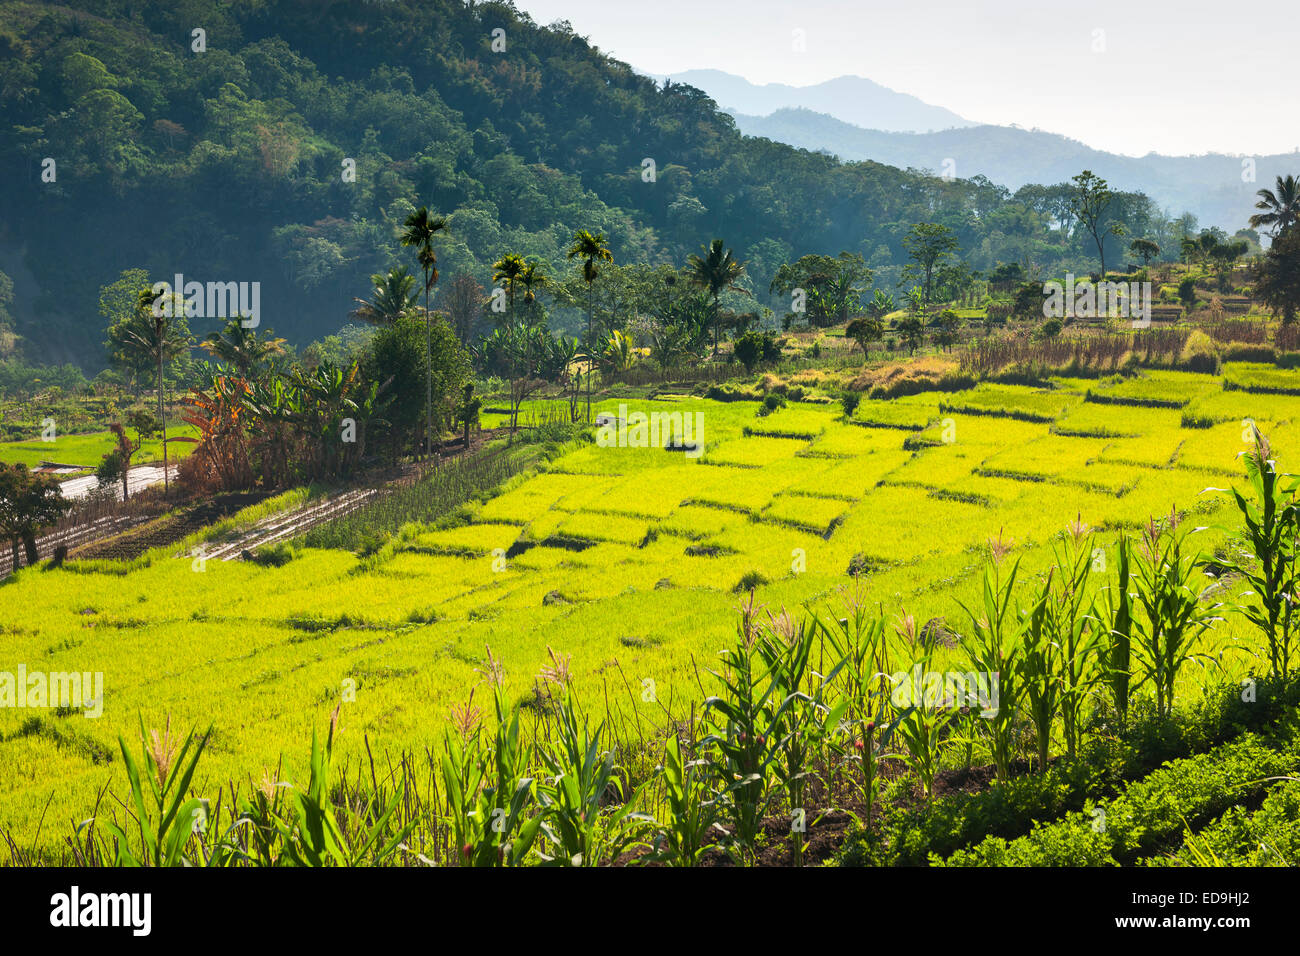 Terraced rice paddies near the town of Moni on the island of Flores in Indonesia. Stock Photo